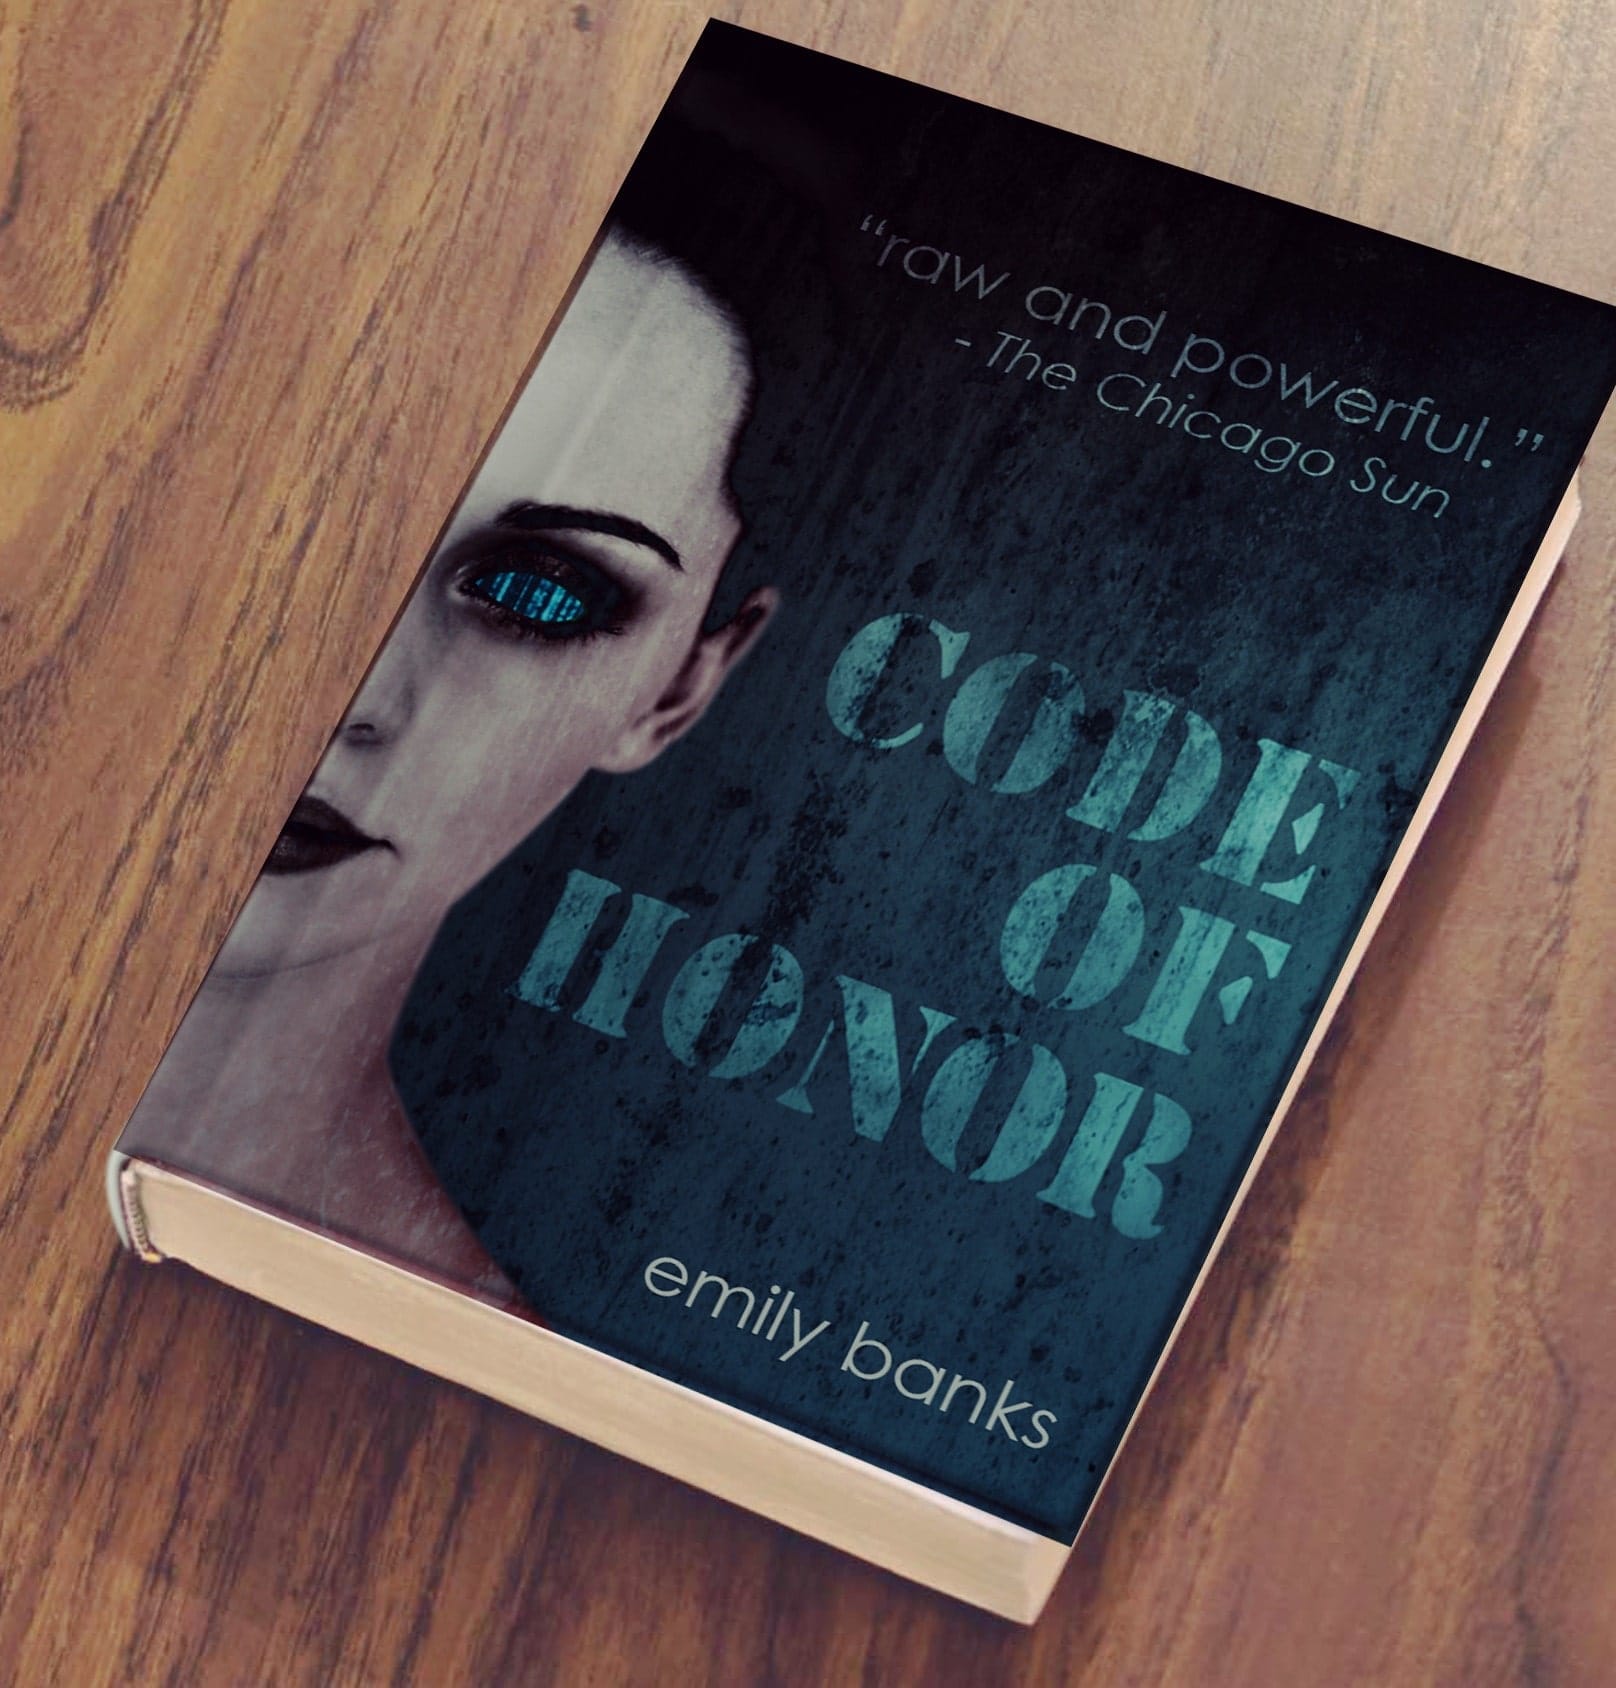 Book cover with a girl's face on it. The background is a blue grungey texture and her visible eye has no white or iris, only a glowing blue barcode.